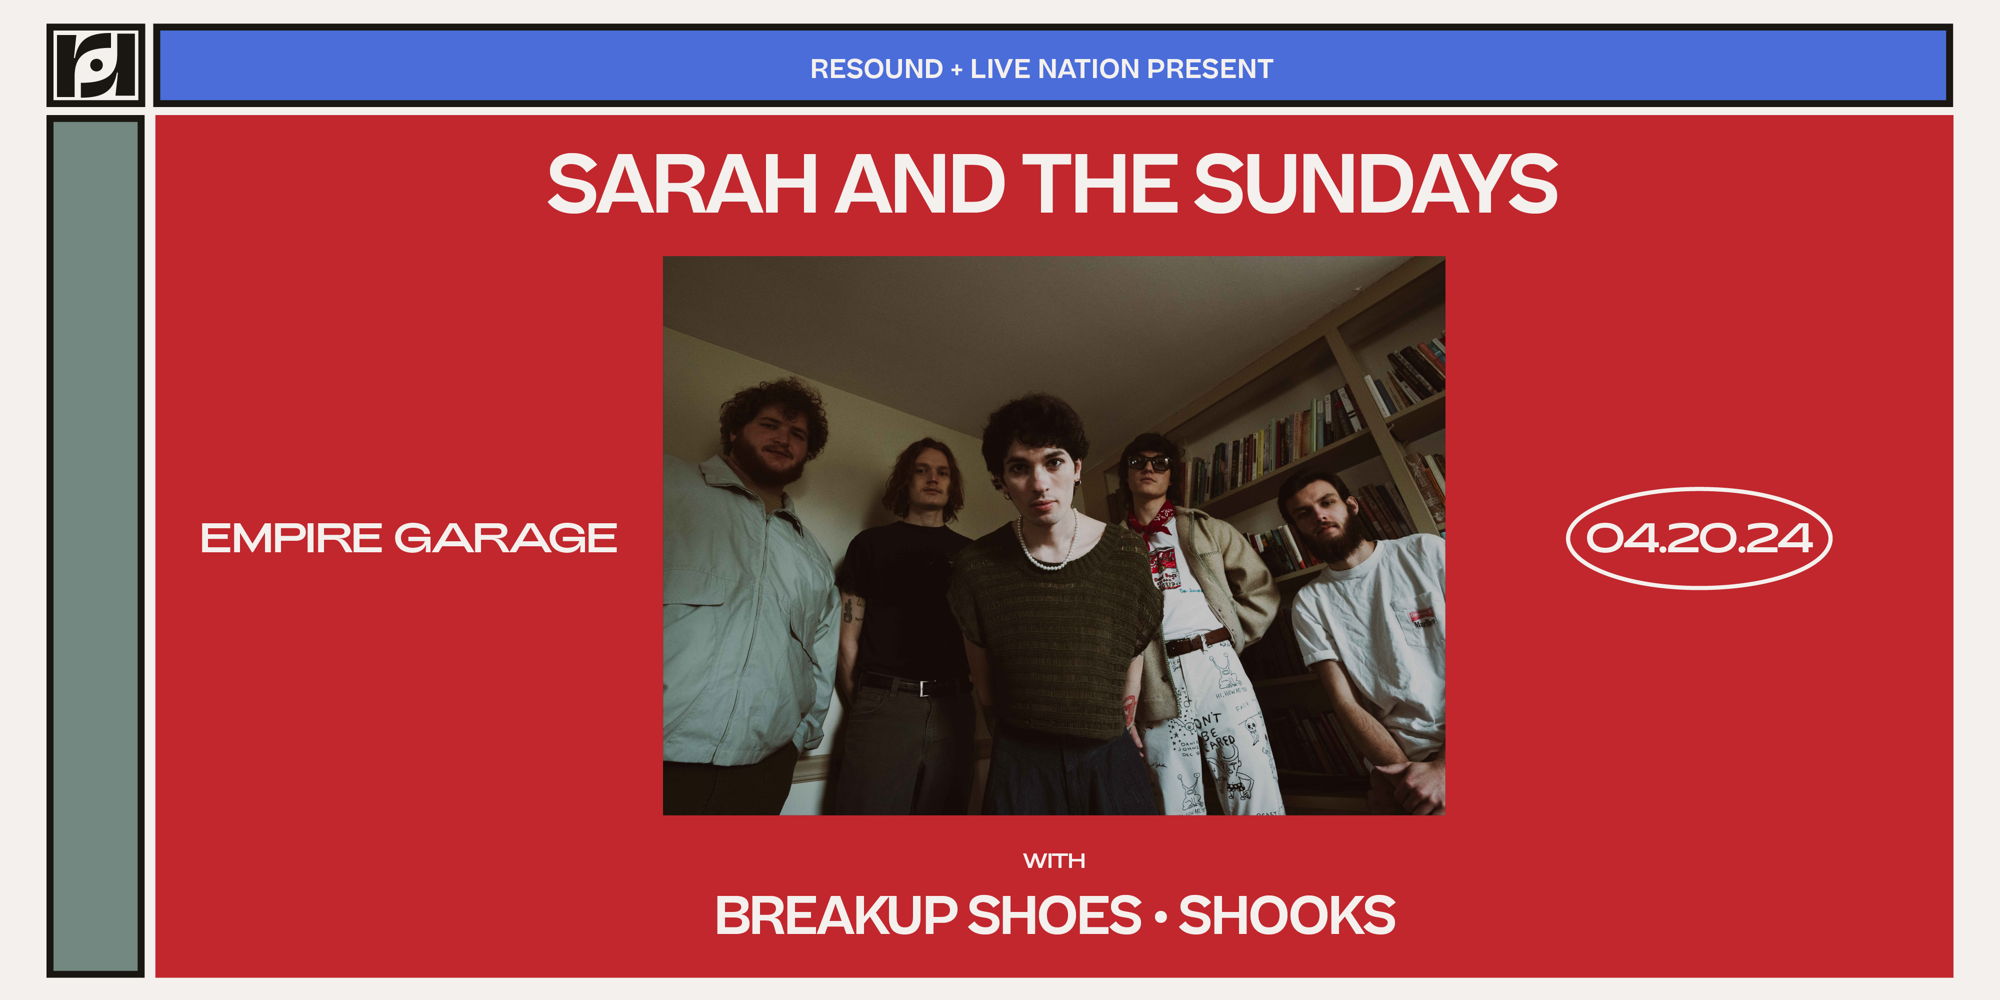 Resound + Live Nation Present: Sarah and the Sundays w/ Breakup Shoes & Shooks at Empire Garage promotional image